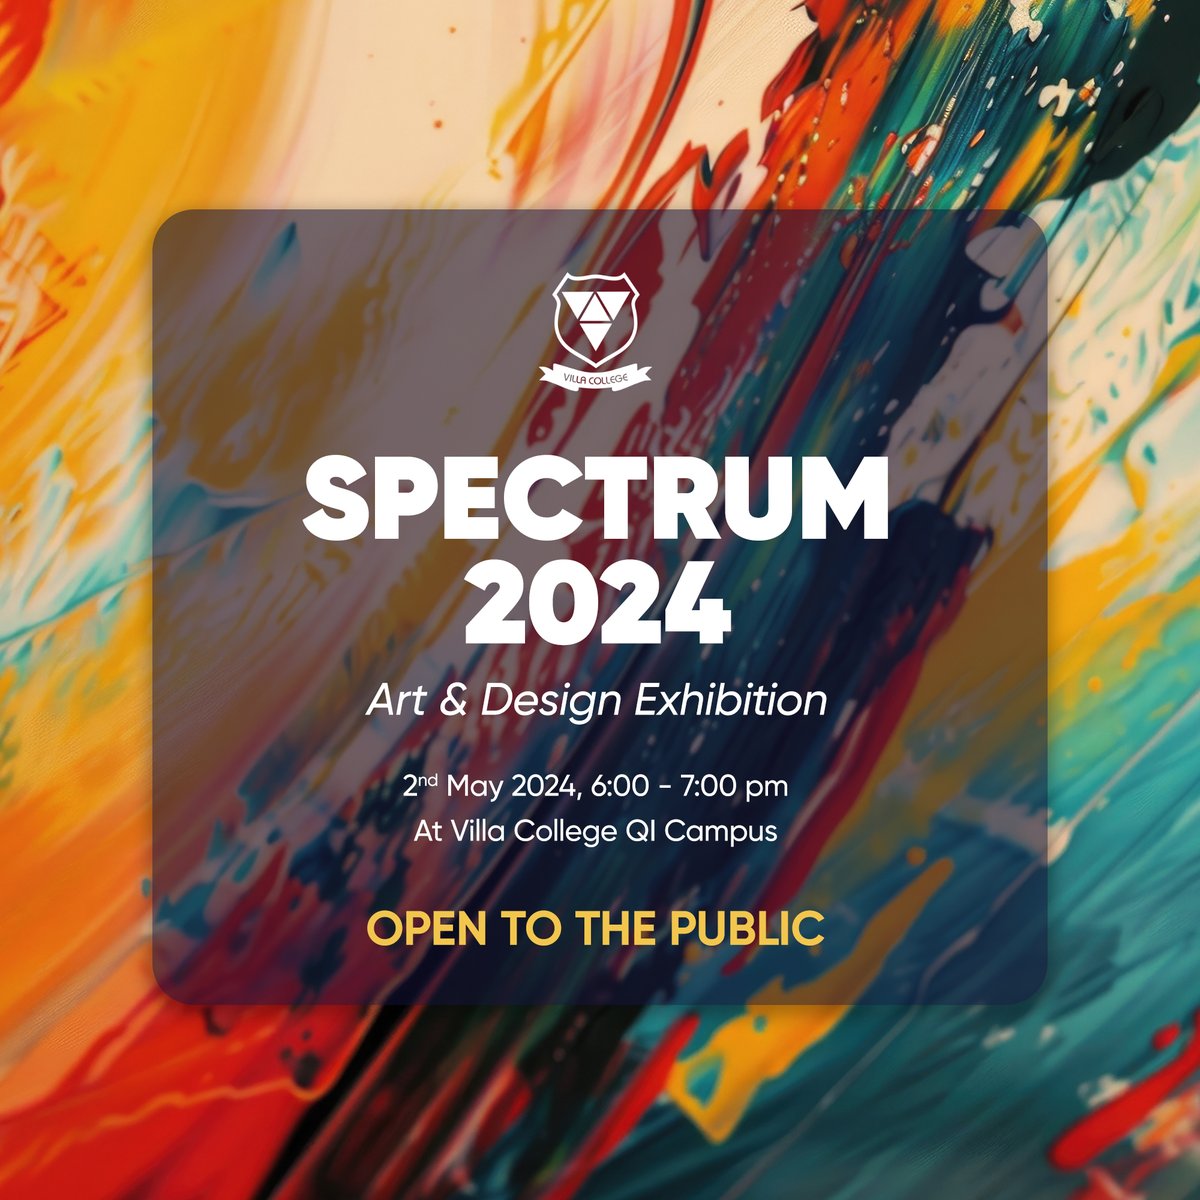 Exciting Announcement! Join us for our 4th Art and Design exhibition - Spectrum 2024, happening on Thursday, 2nd, May 2024. Come between 6 - 7 pm to witness the incredible artwork created by our talented students. Don't miss out! See you there! #Spectrum2024 #ArtExhibition…